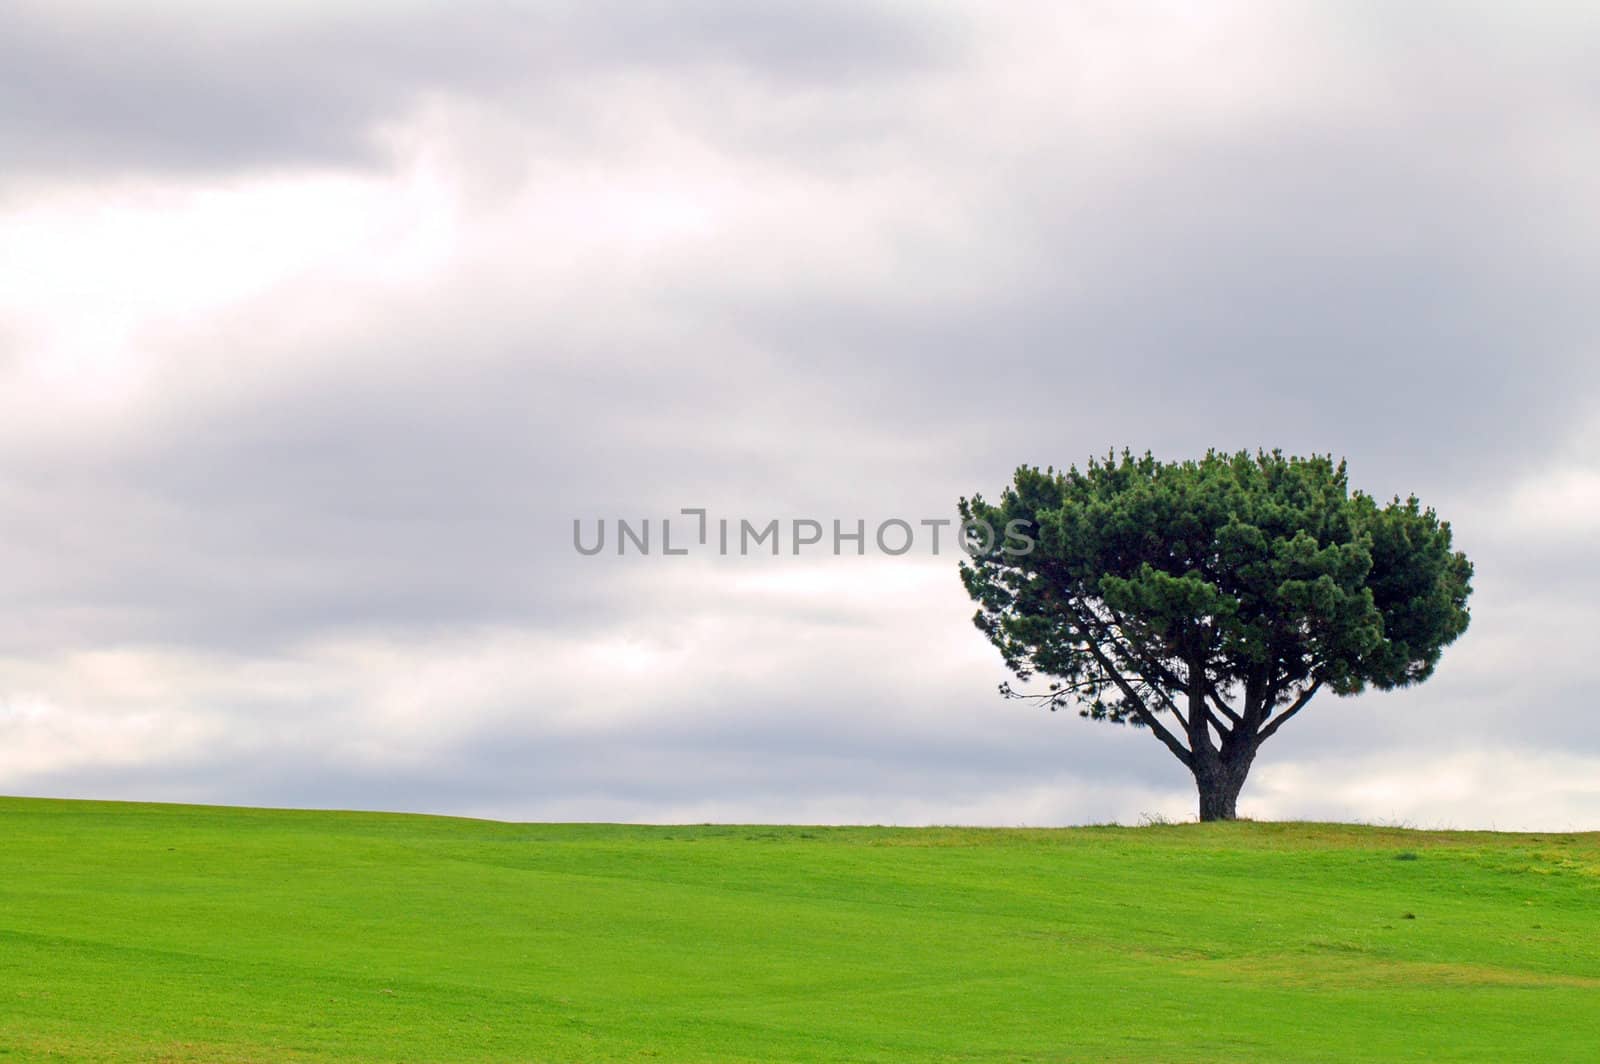 solitary tree, green field, grey clouds, it's going to rain